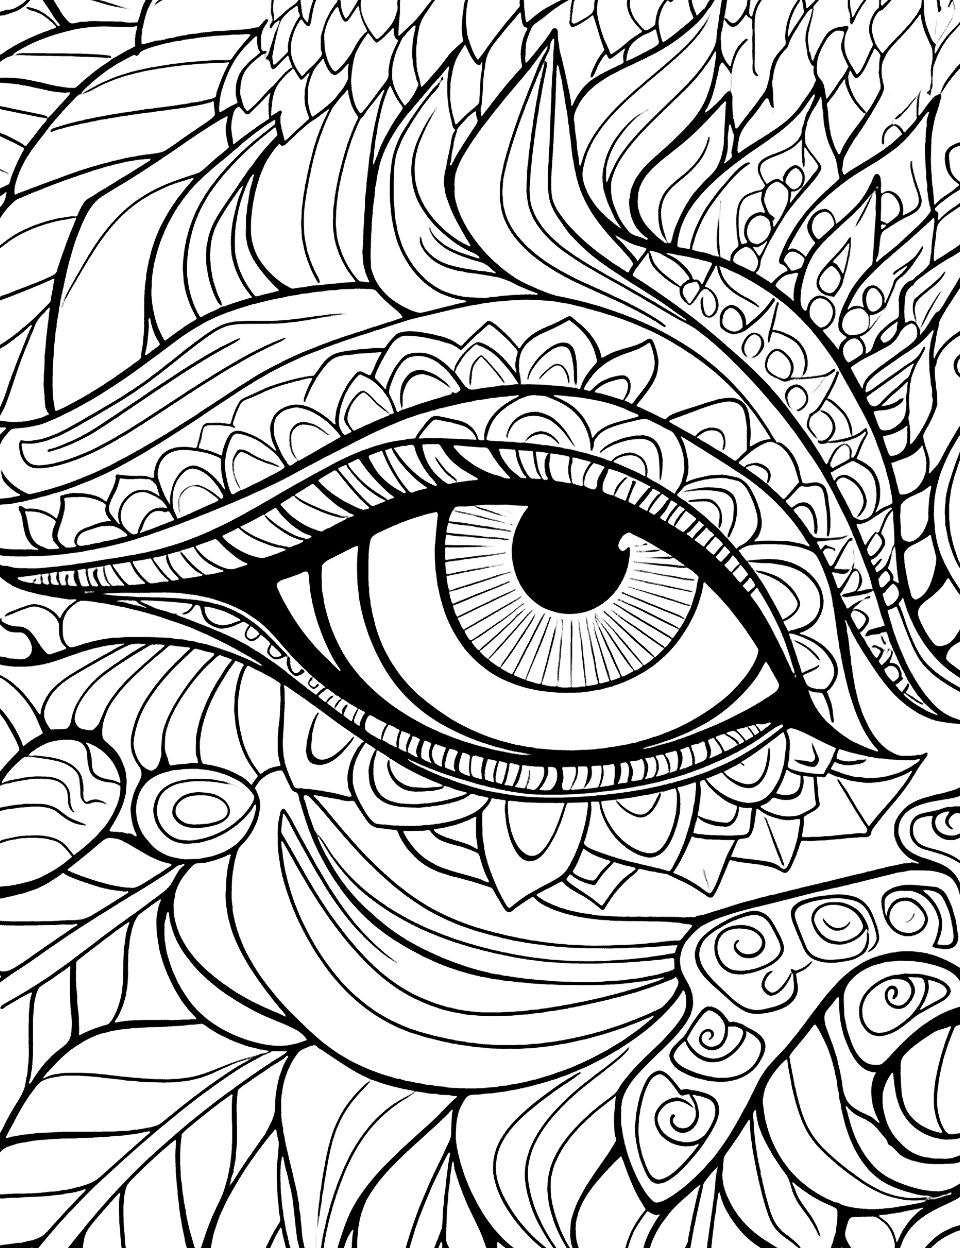 Abstract Dragon's Eye Adult Coloring Page - An abstract design centered around a dragon’s eye, filled with geometric shapes and intricate patterns.